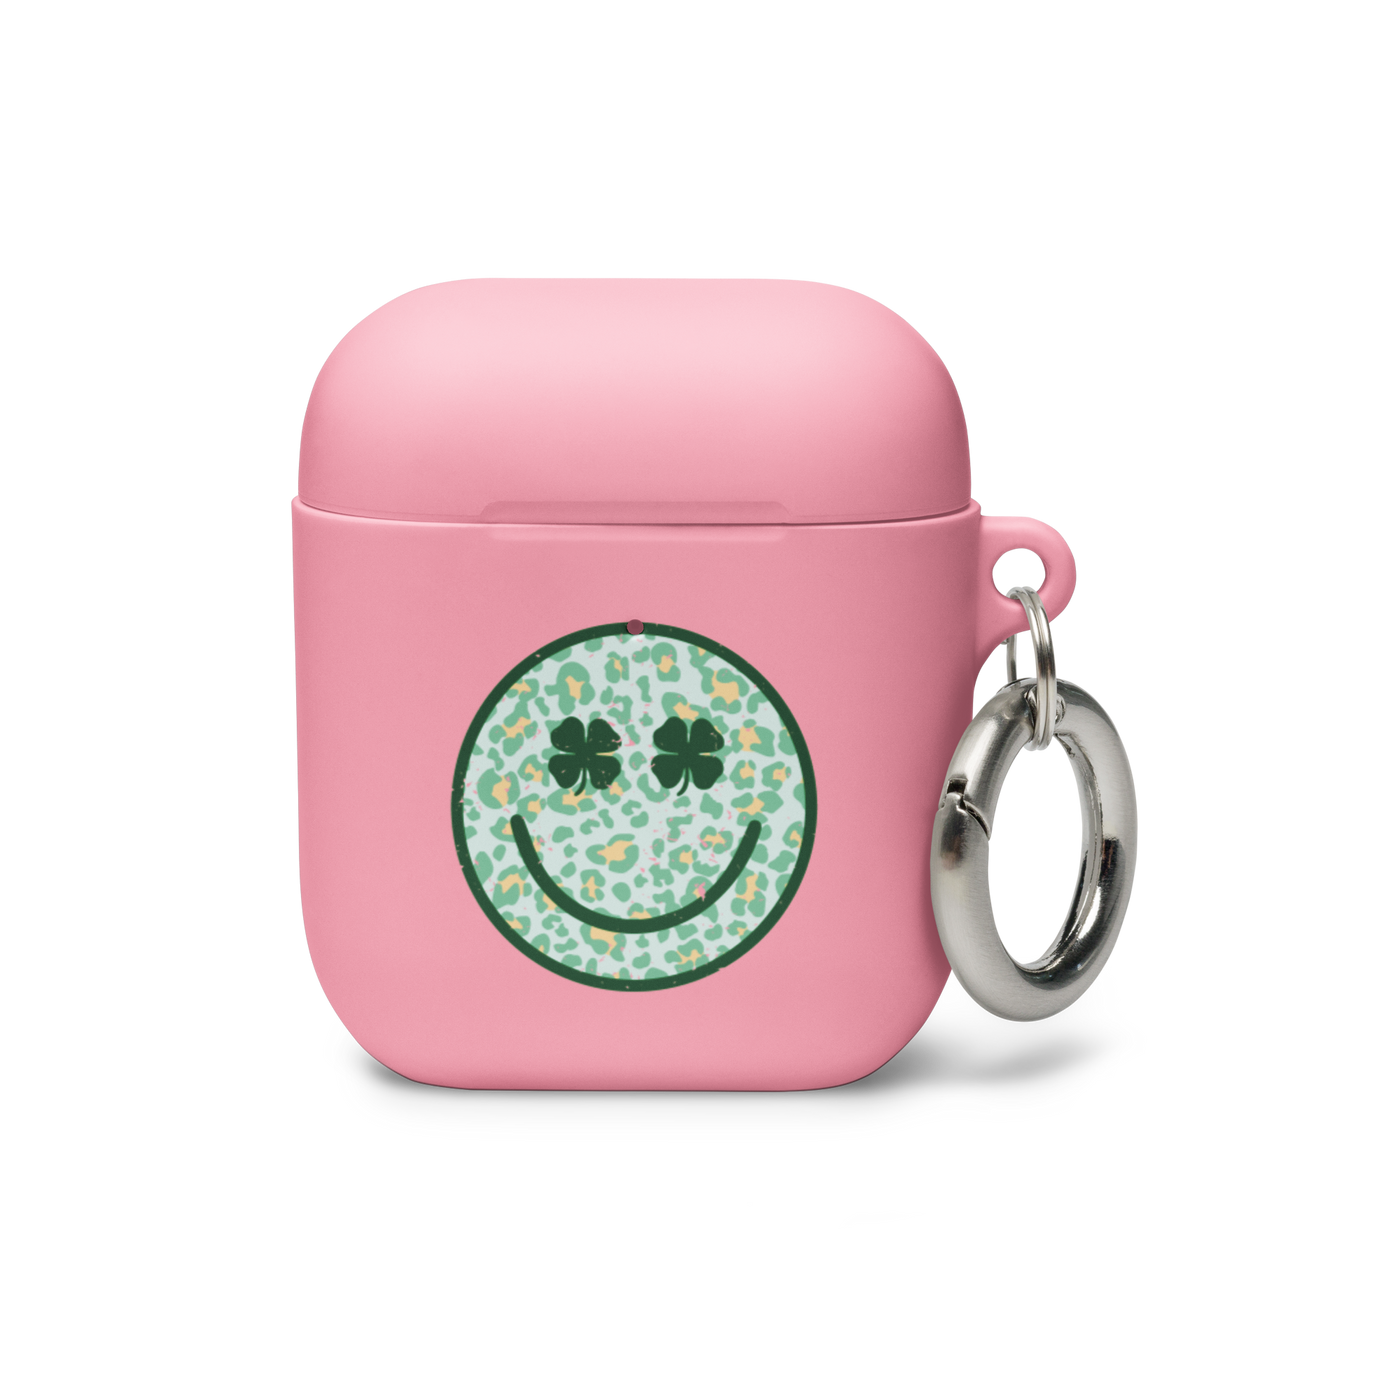 Smiley Print AirPods Case